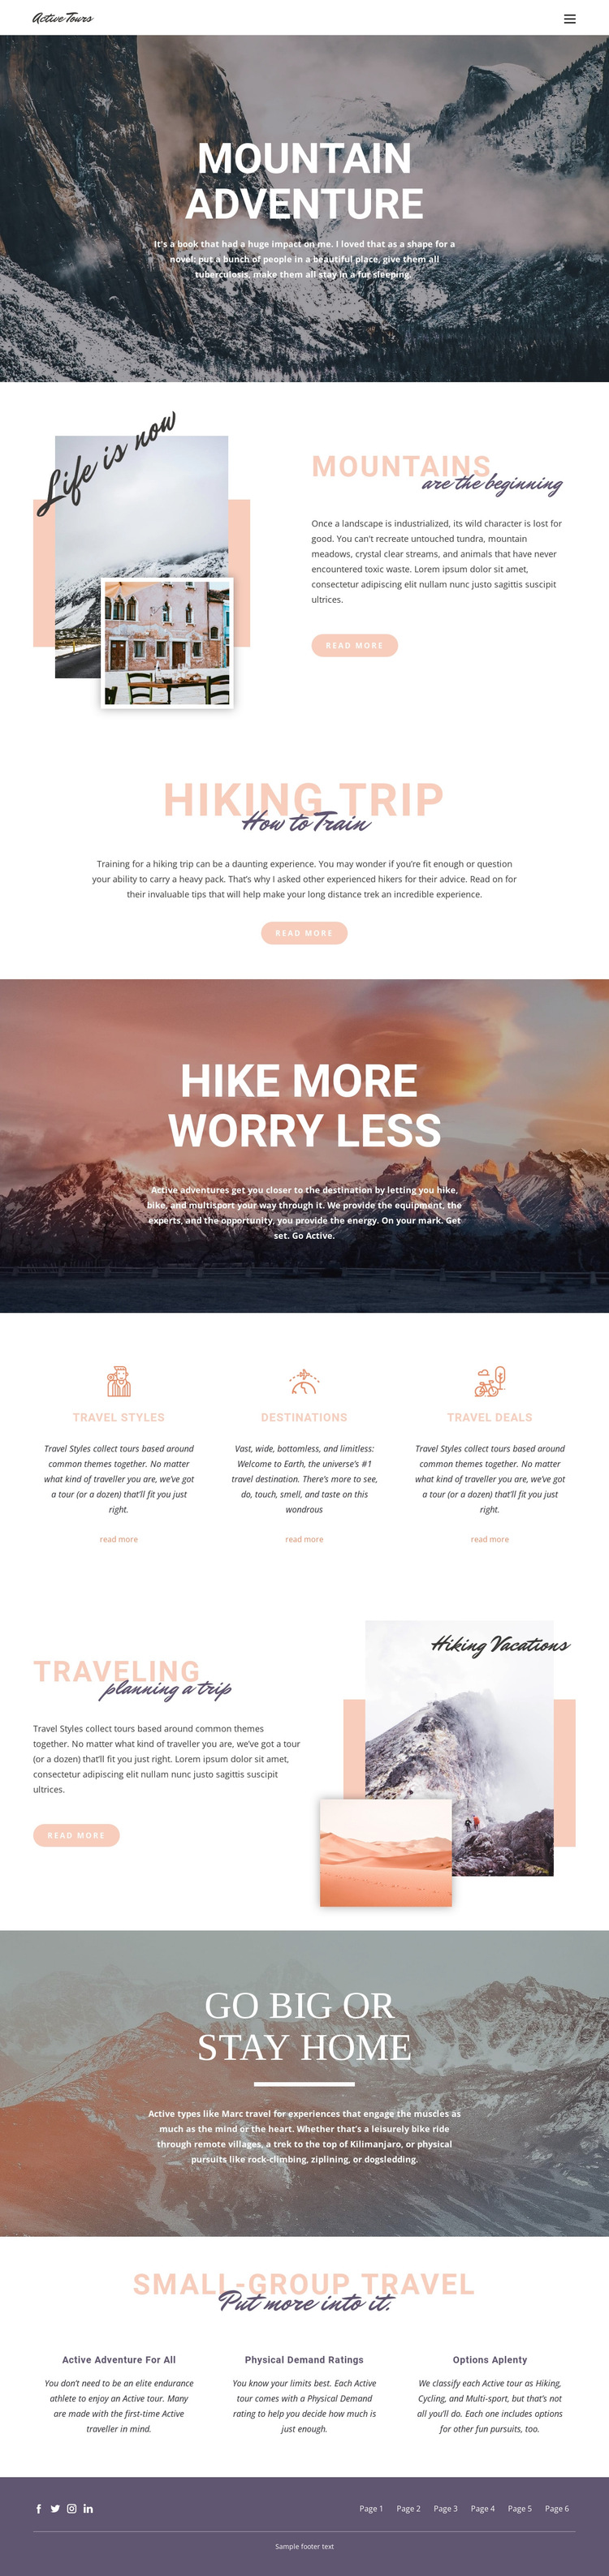 Guided backpacking trips HTML5 Template